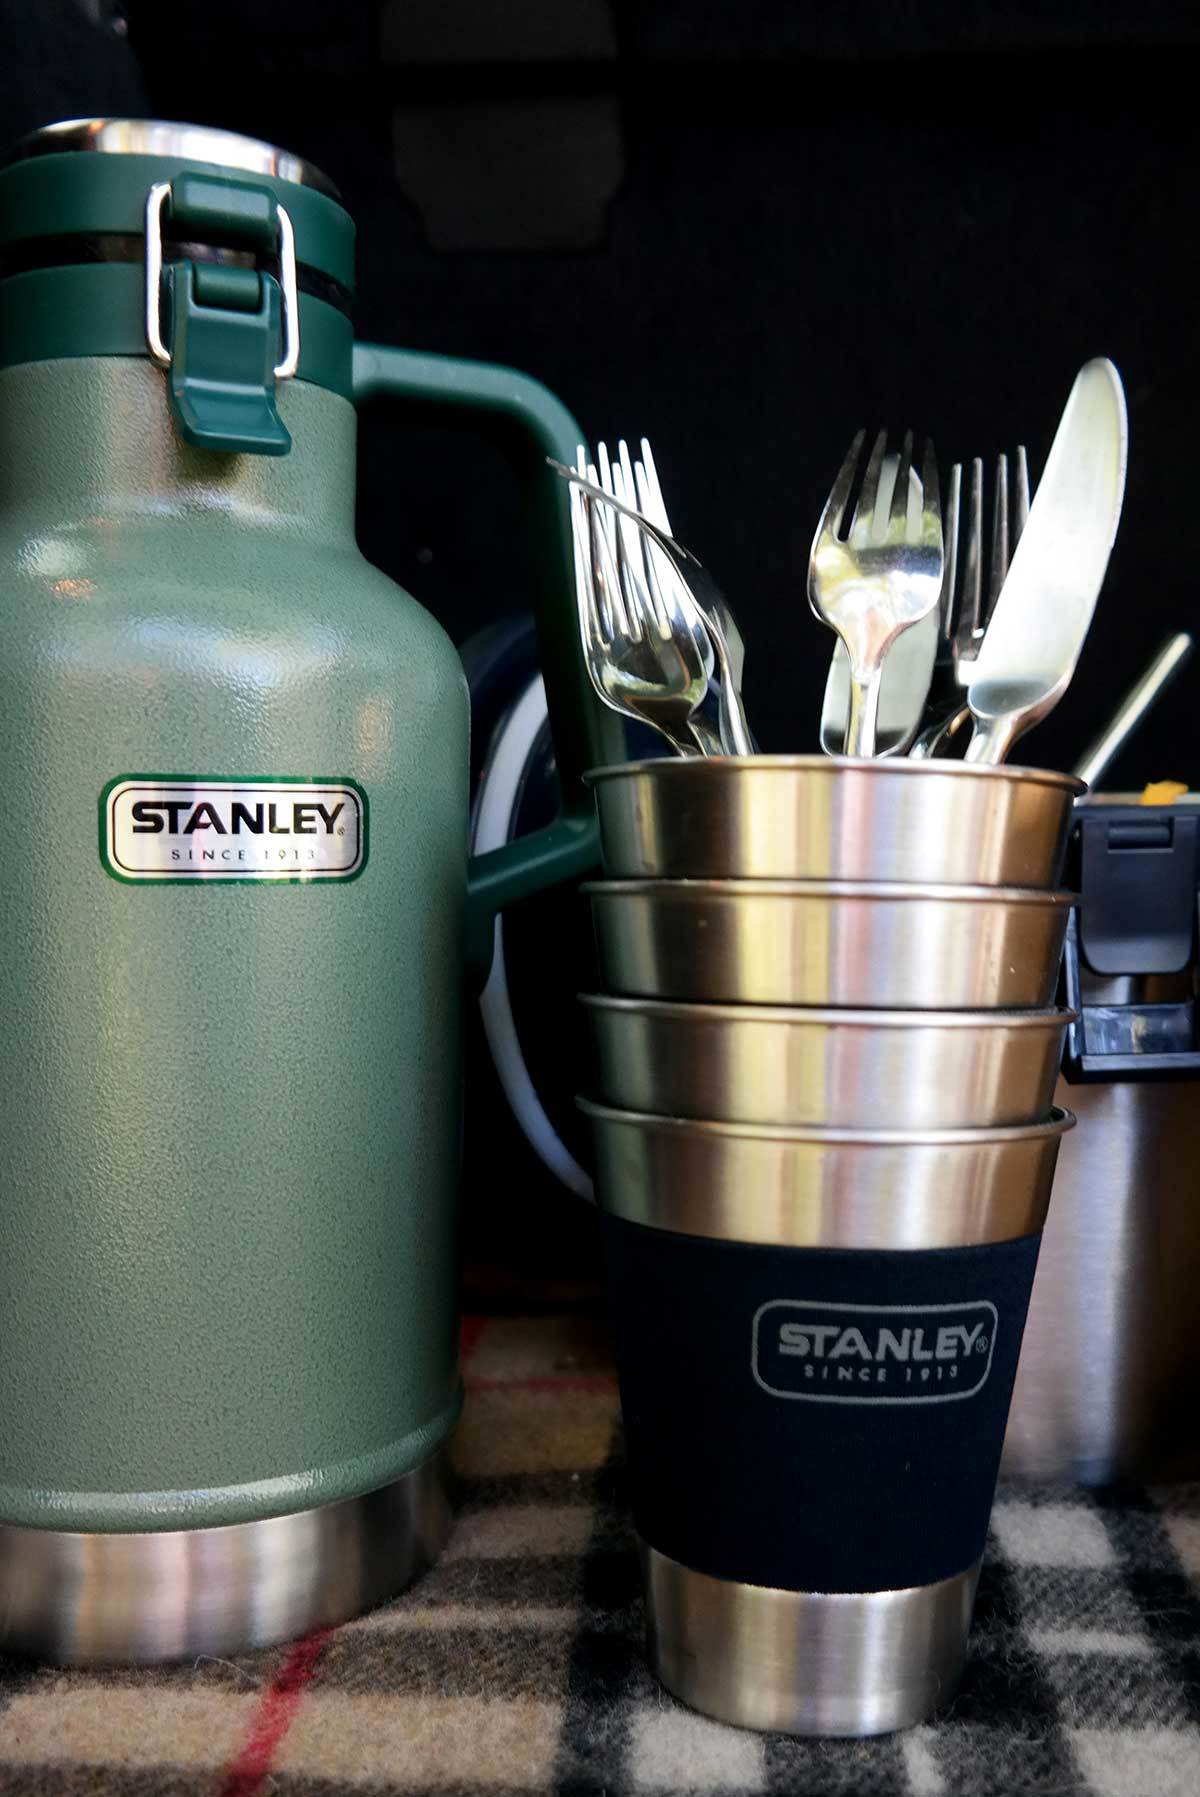 Stanley Brand thermos and tumblers https://ooh.li/a65e49e